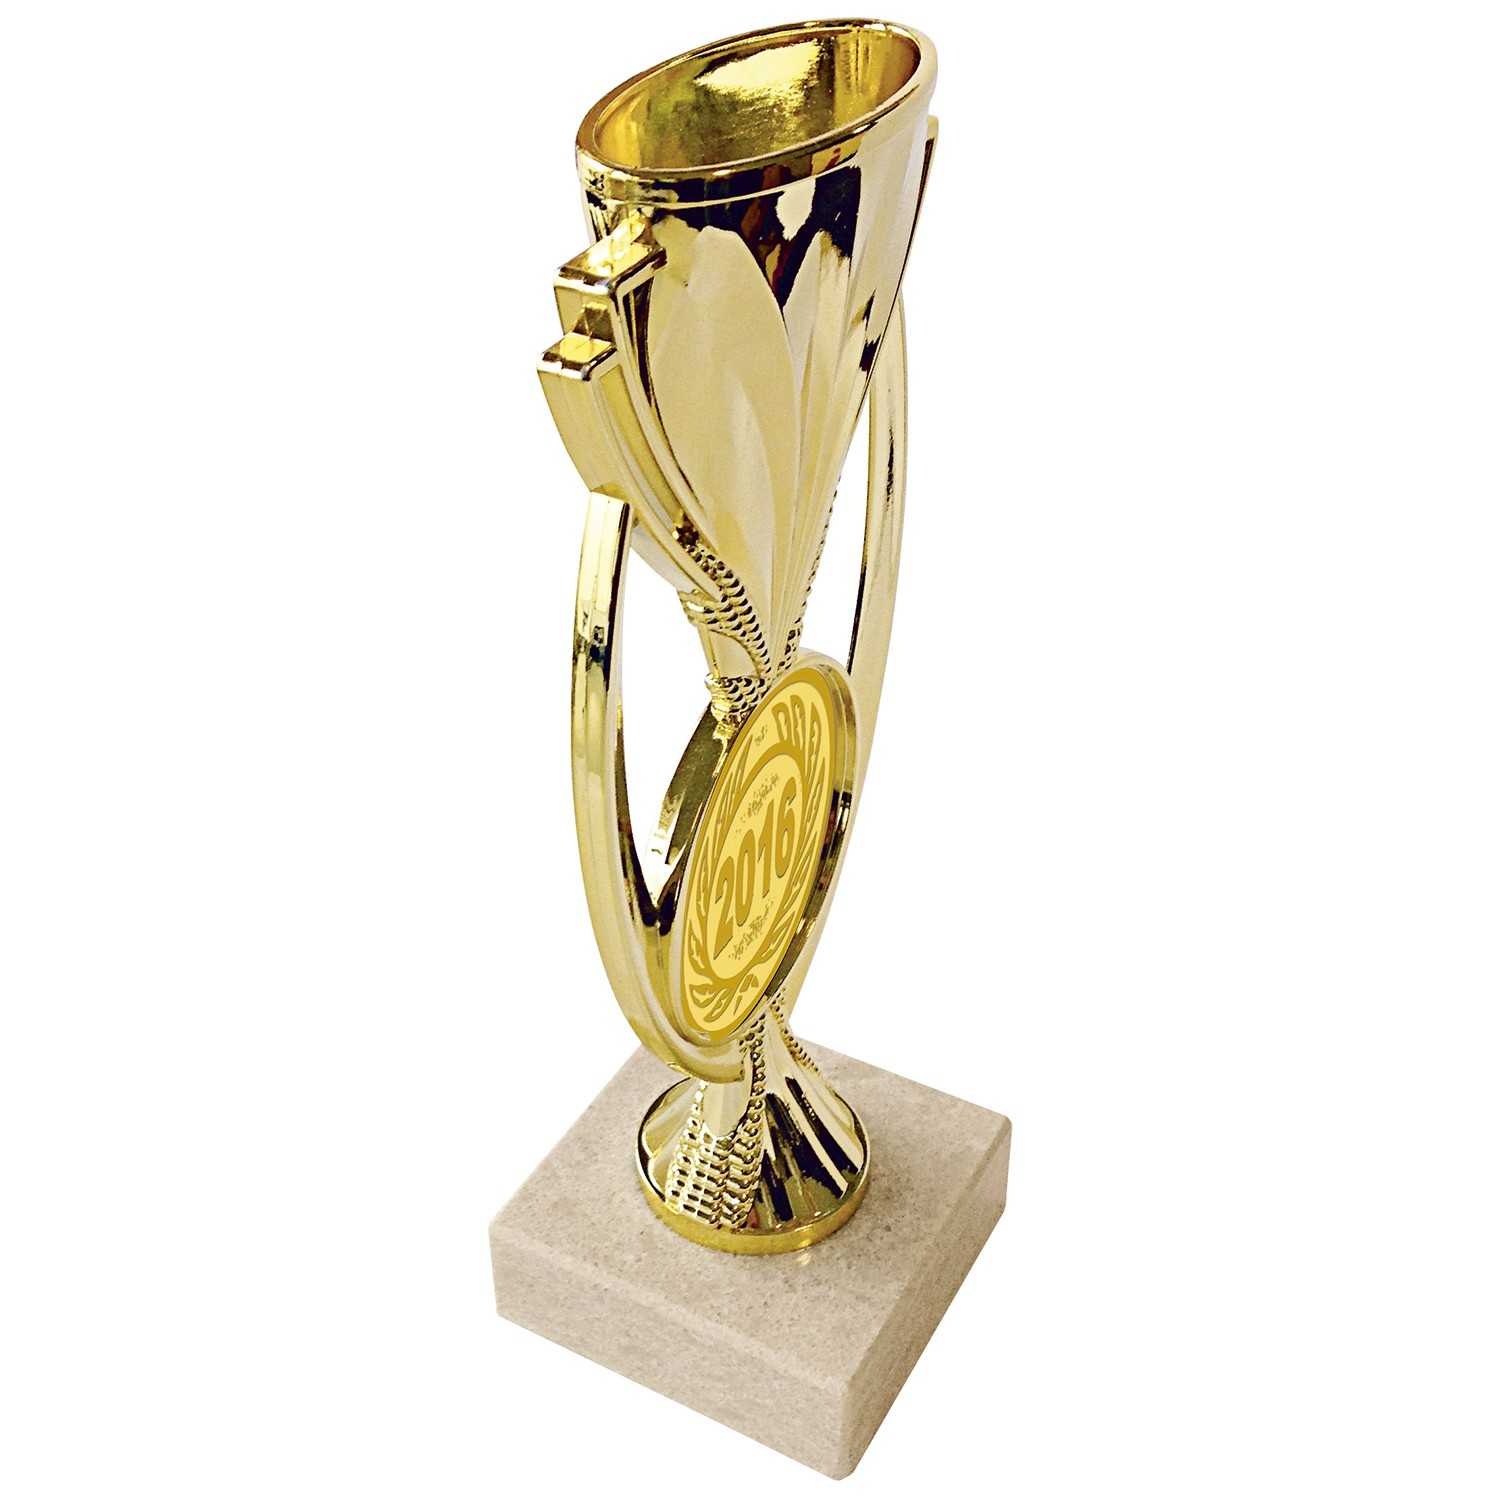 TROPHEE COUPE